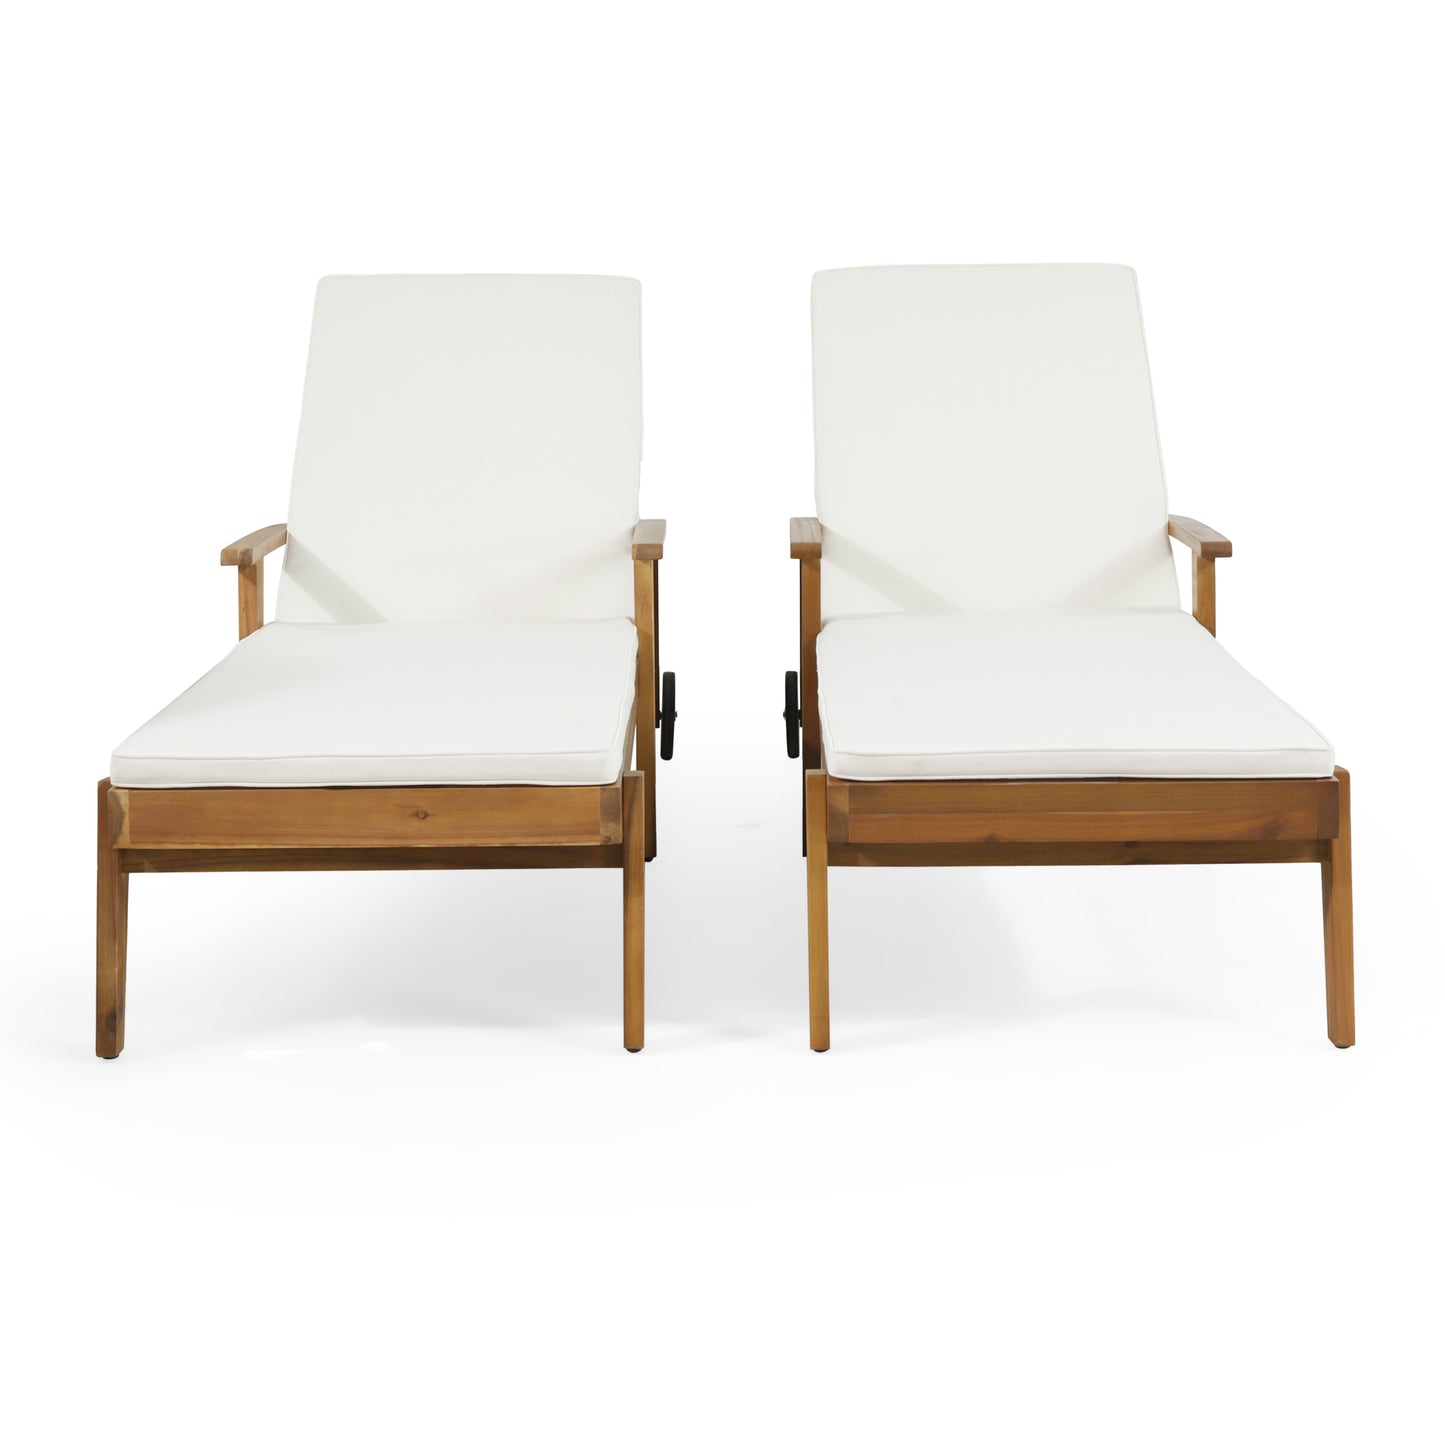 Lucknow Outdoor Acacia Wood Chaise Lounge with Water Resistant Cushion, Set of 2